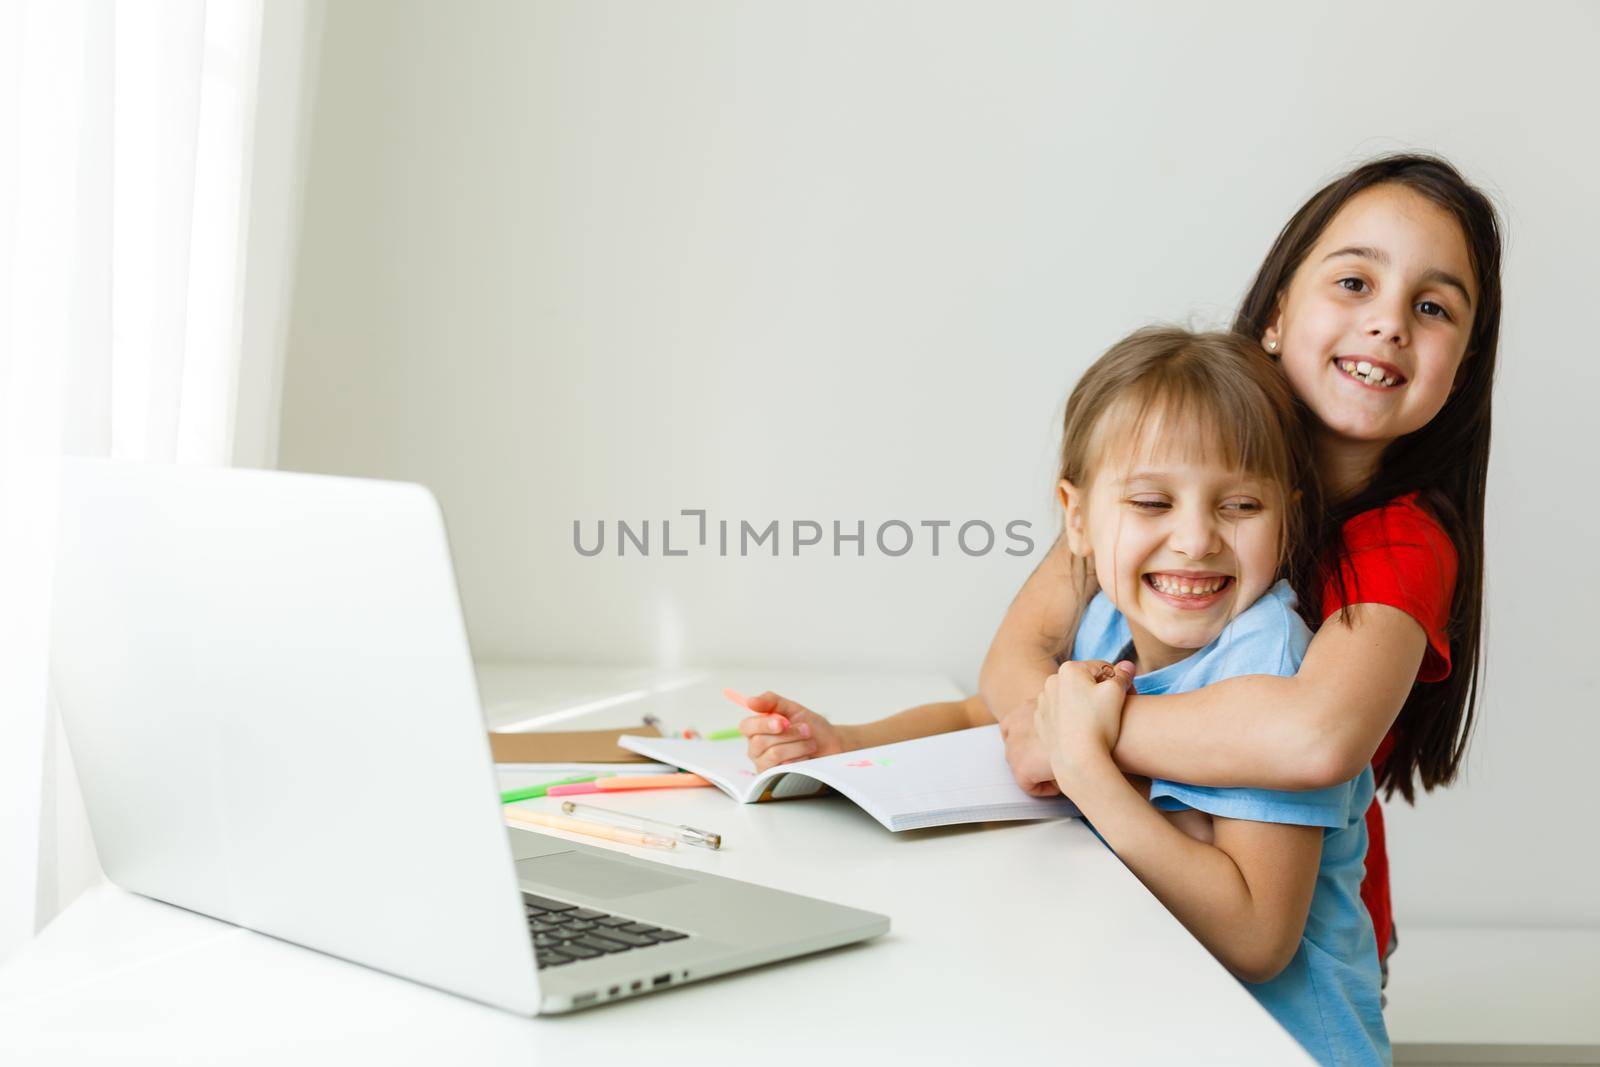 Cool online school. Kids studying online at home using a laptop. Cheerful young little girls using laptop computer studying through online e-learning system. Distance or remote learning